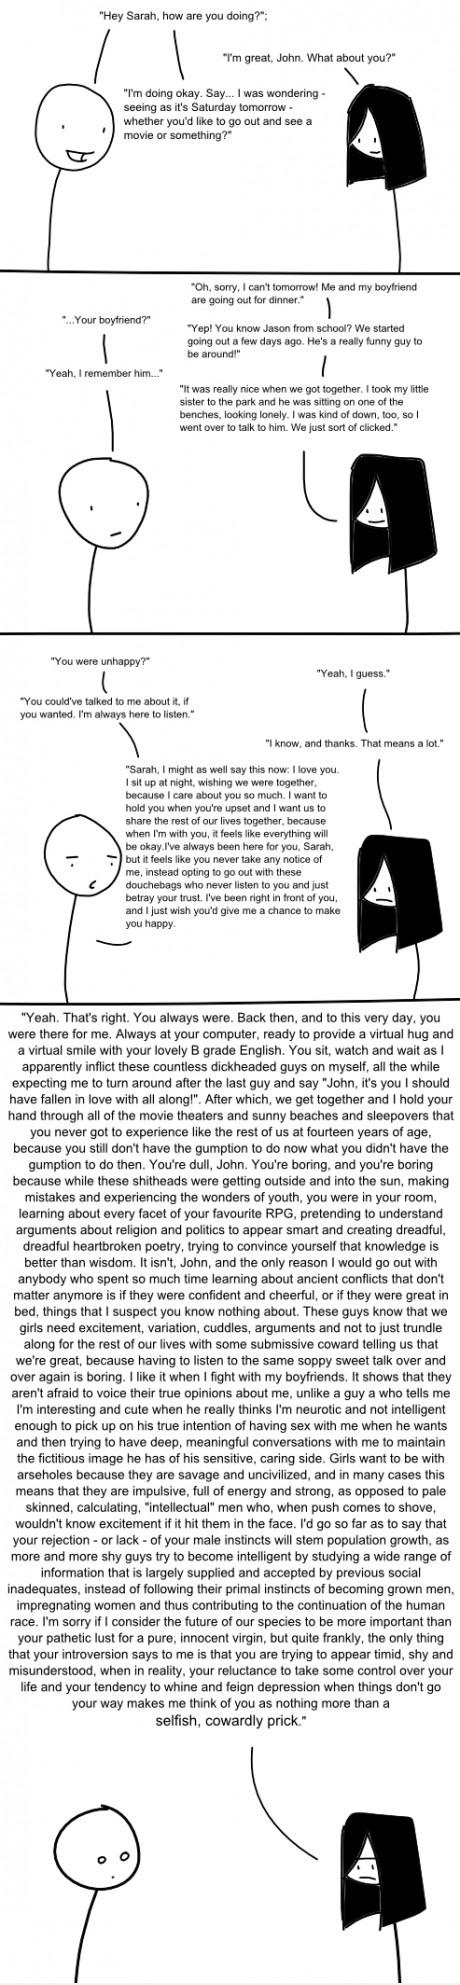 Harsh truth about nerds